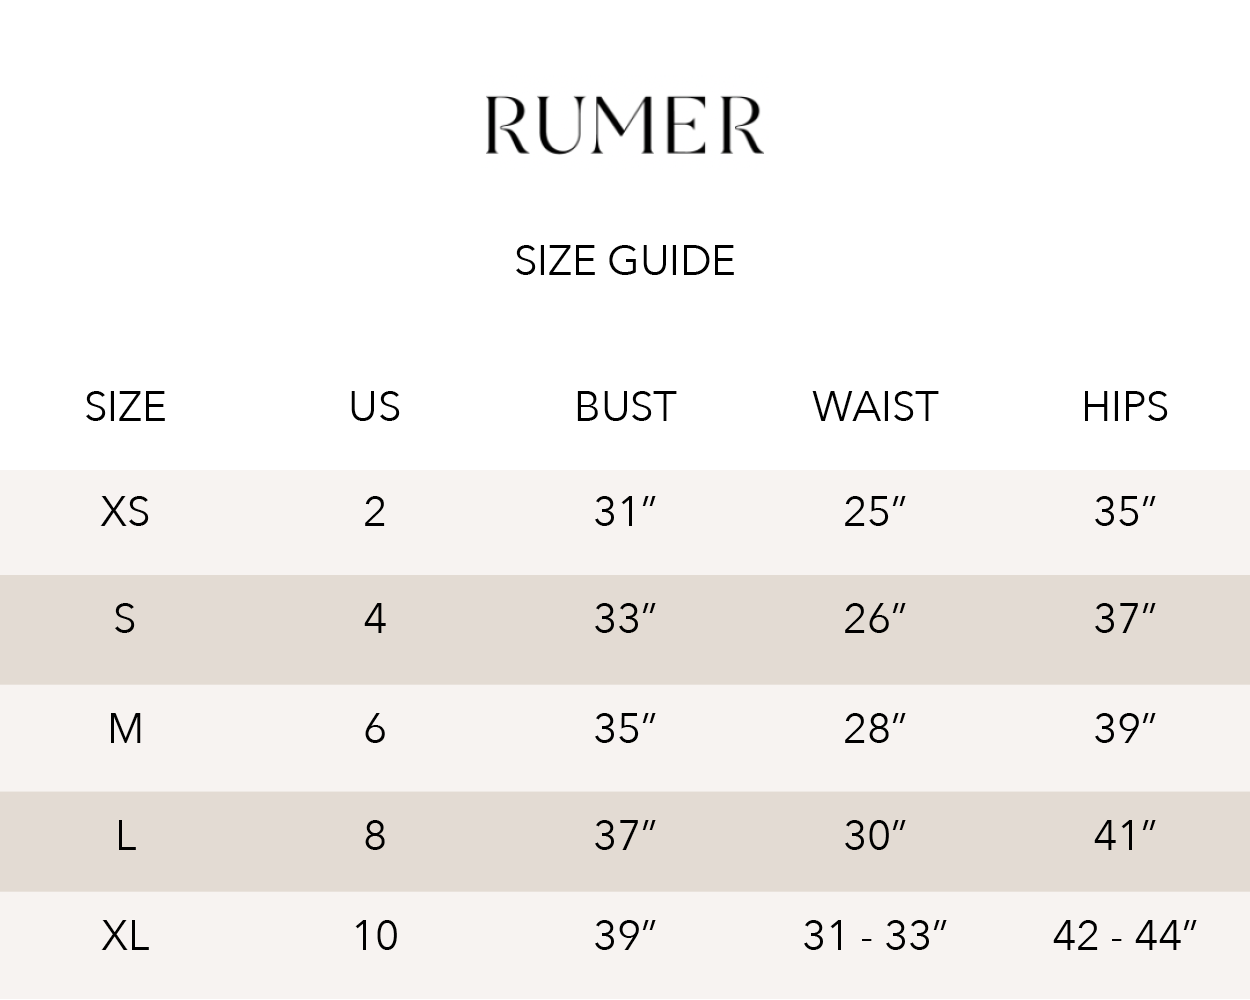 Rumer Size Guide